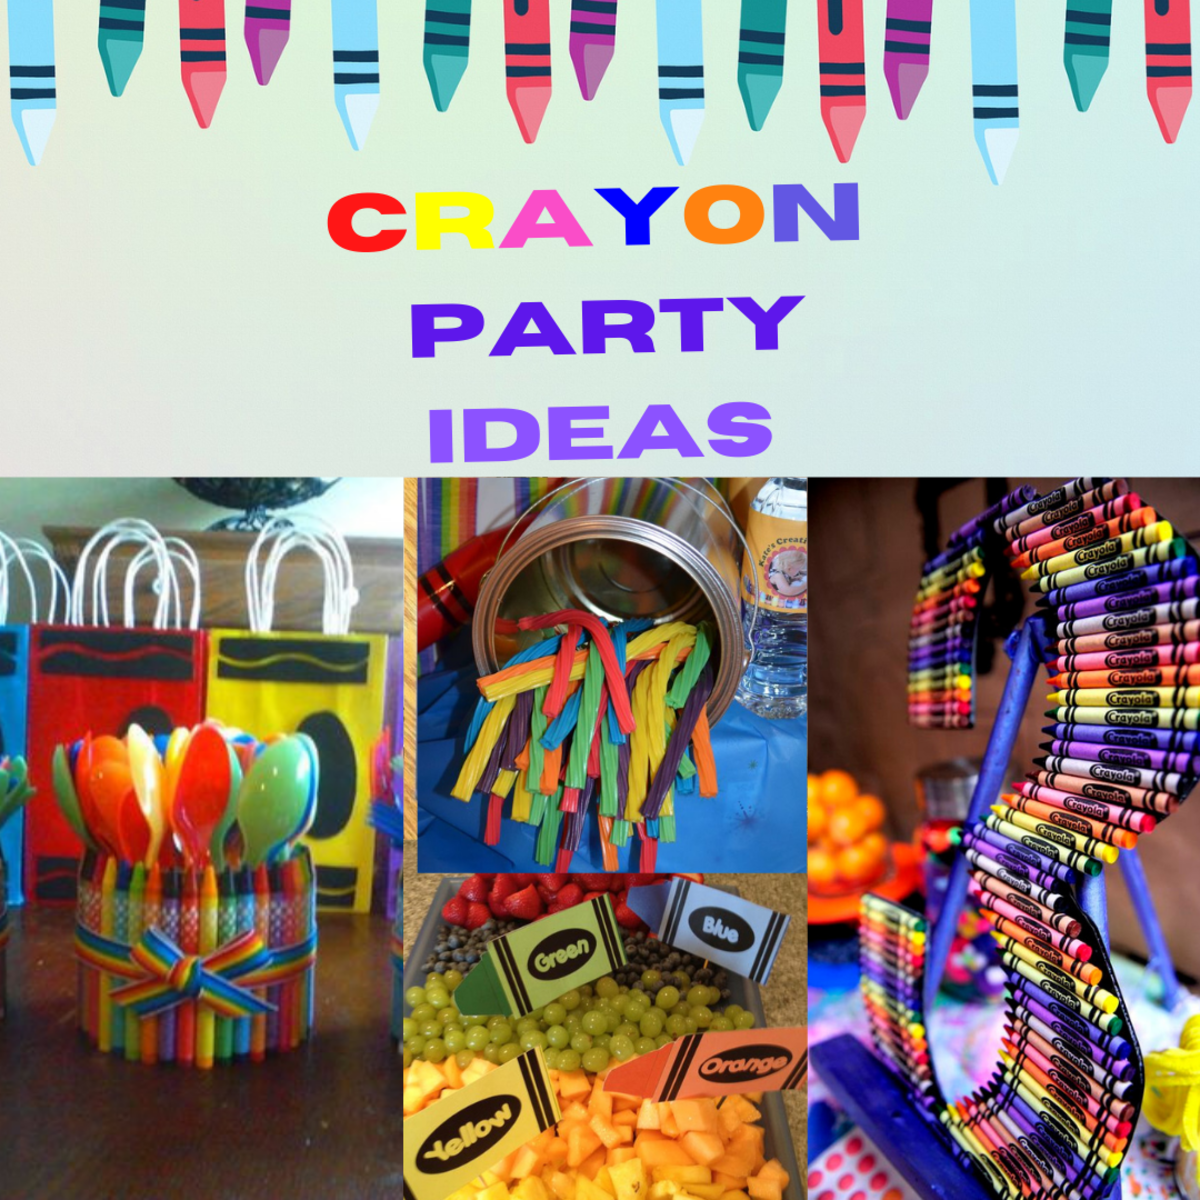 35+ Easy DIY Crayon Party Ideas for a Colorful Time